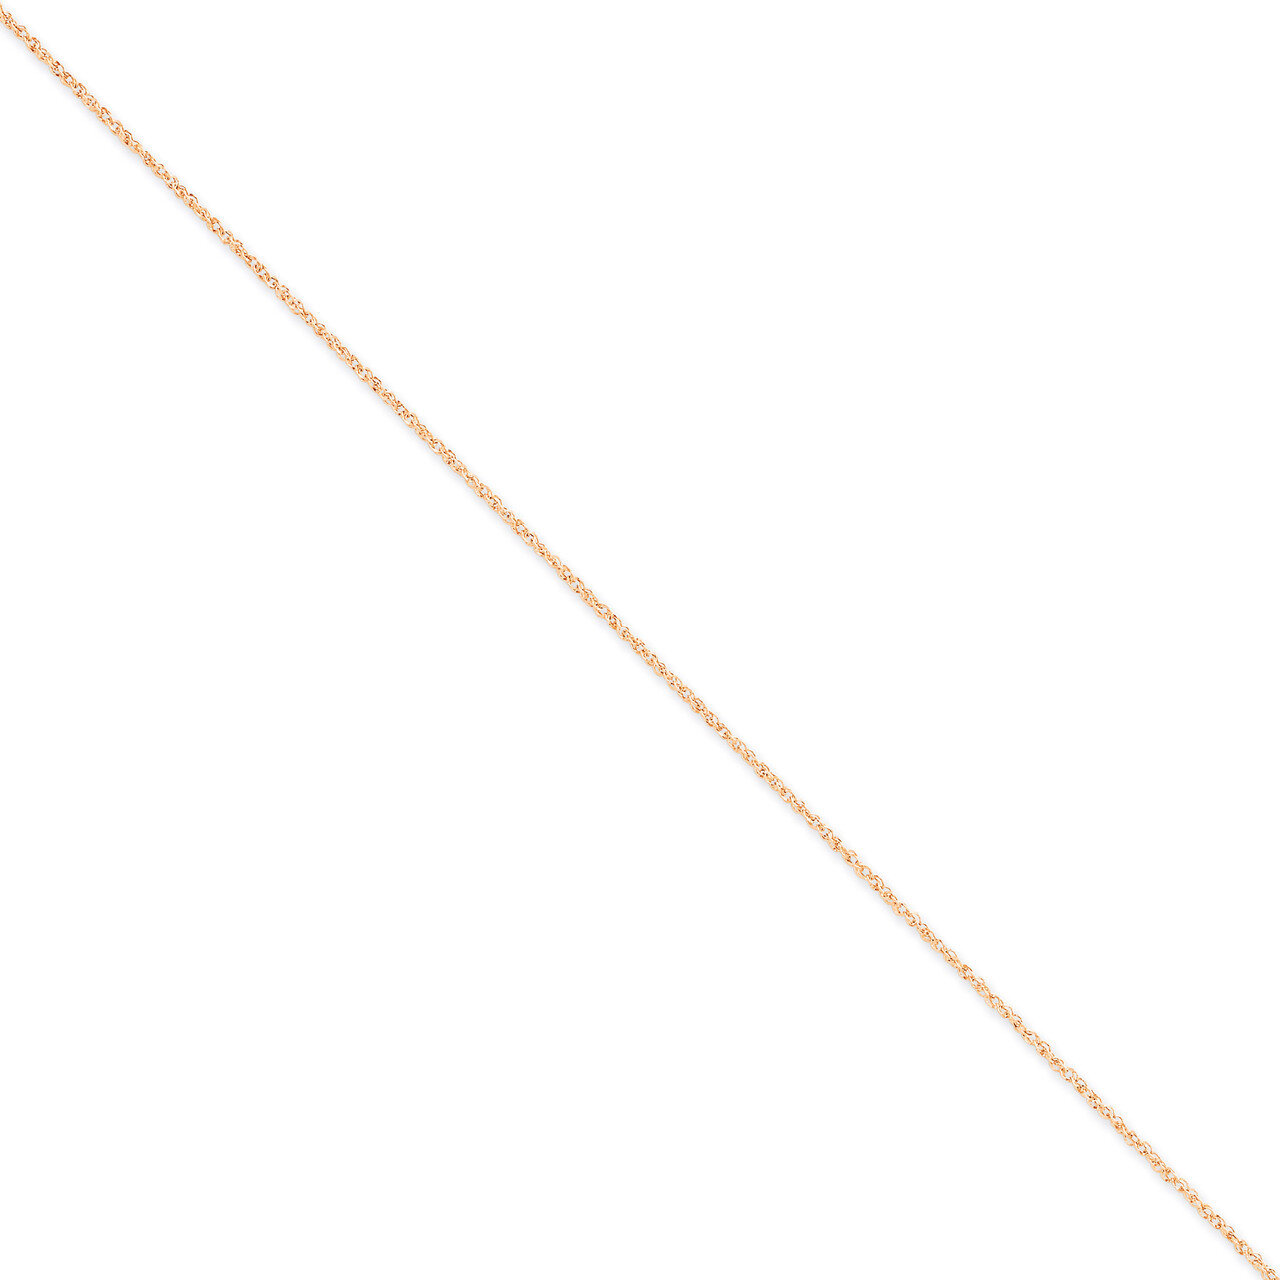 1.1mm Ropa Chain 24 Inch 14k Rose Gold RSC27-24